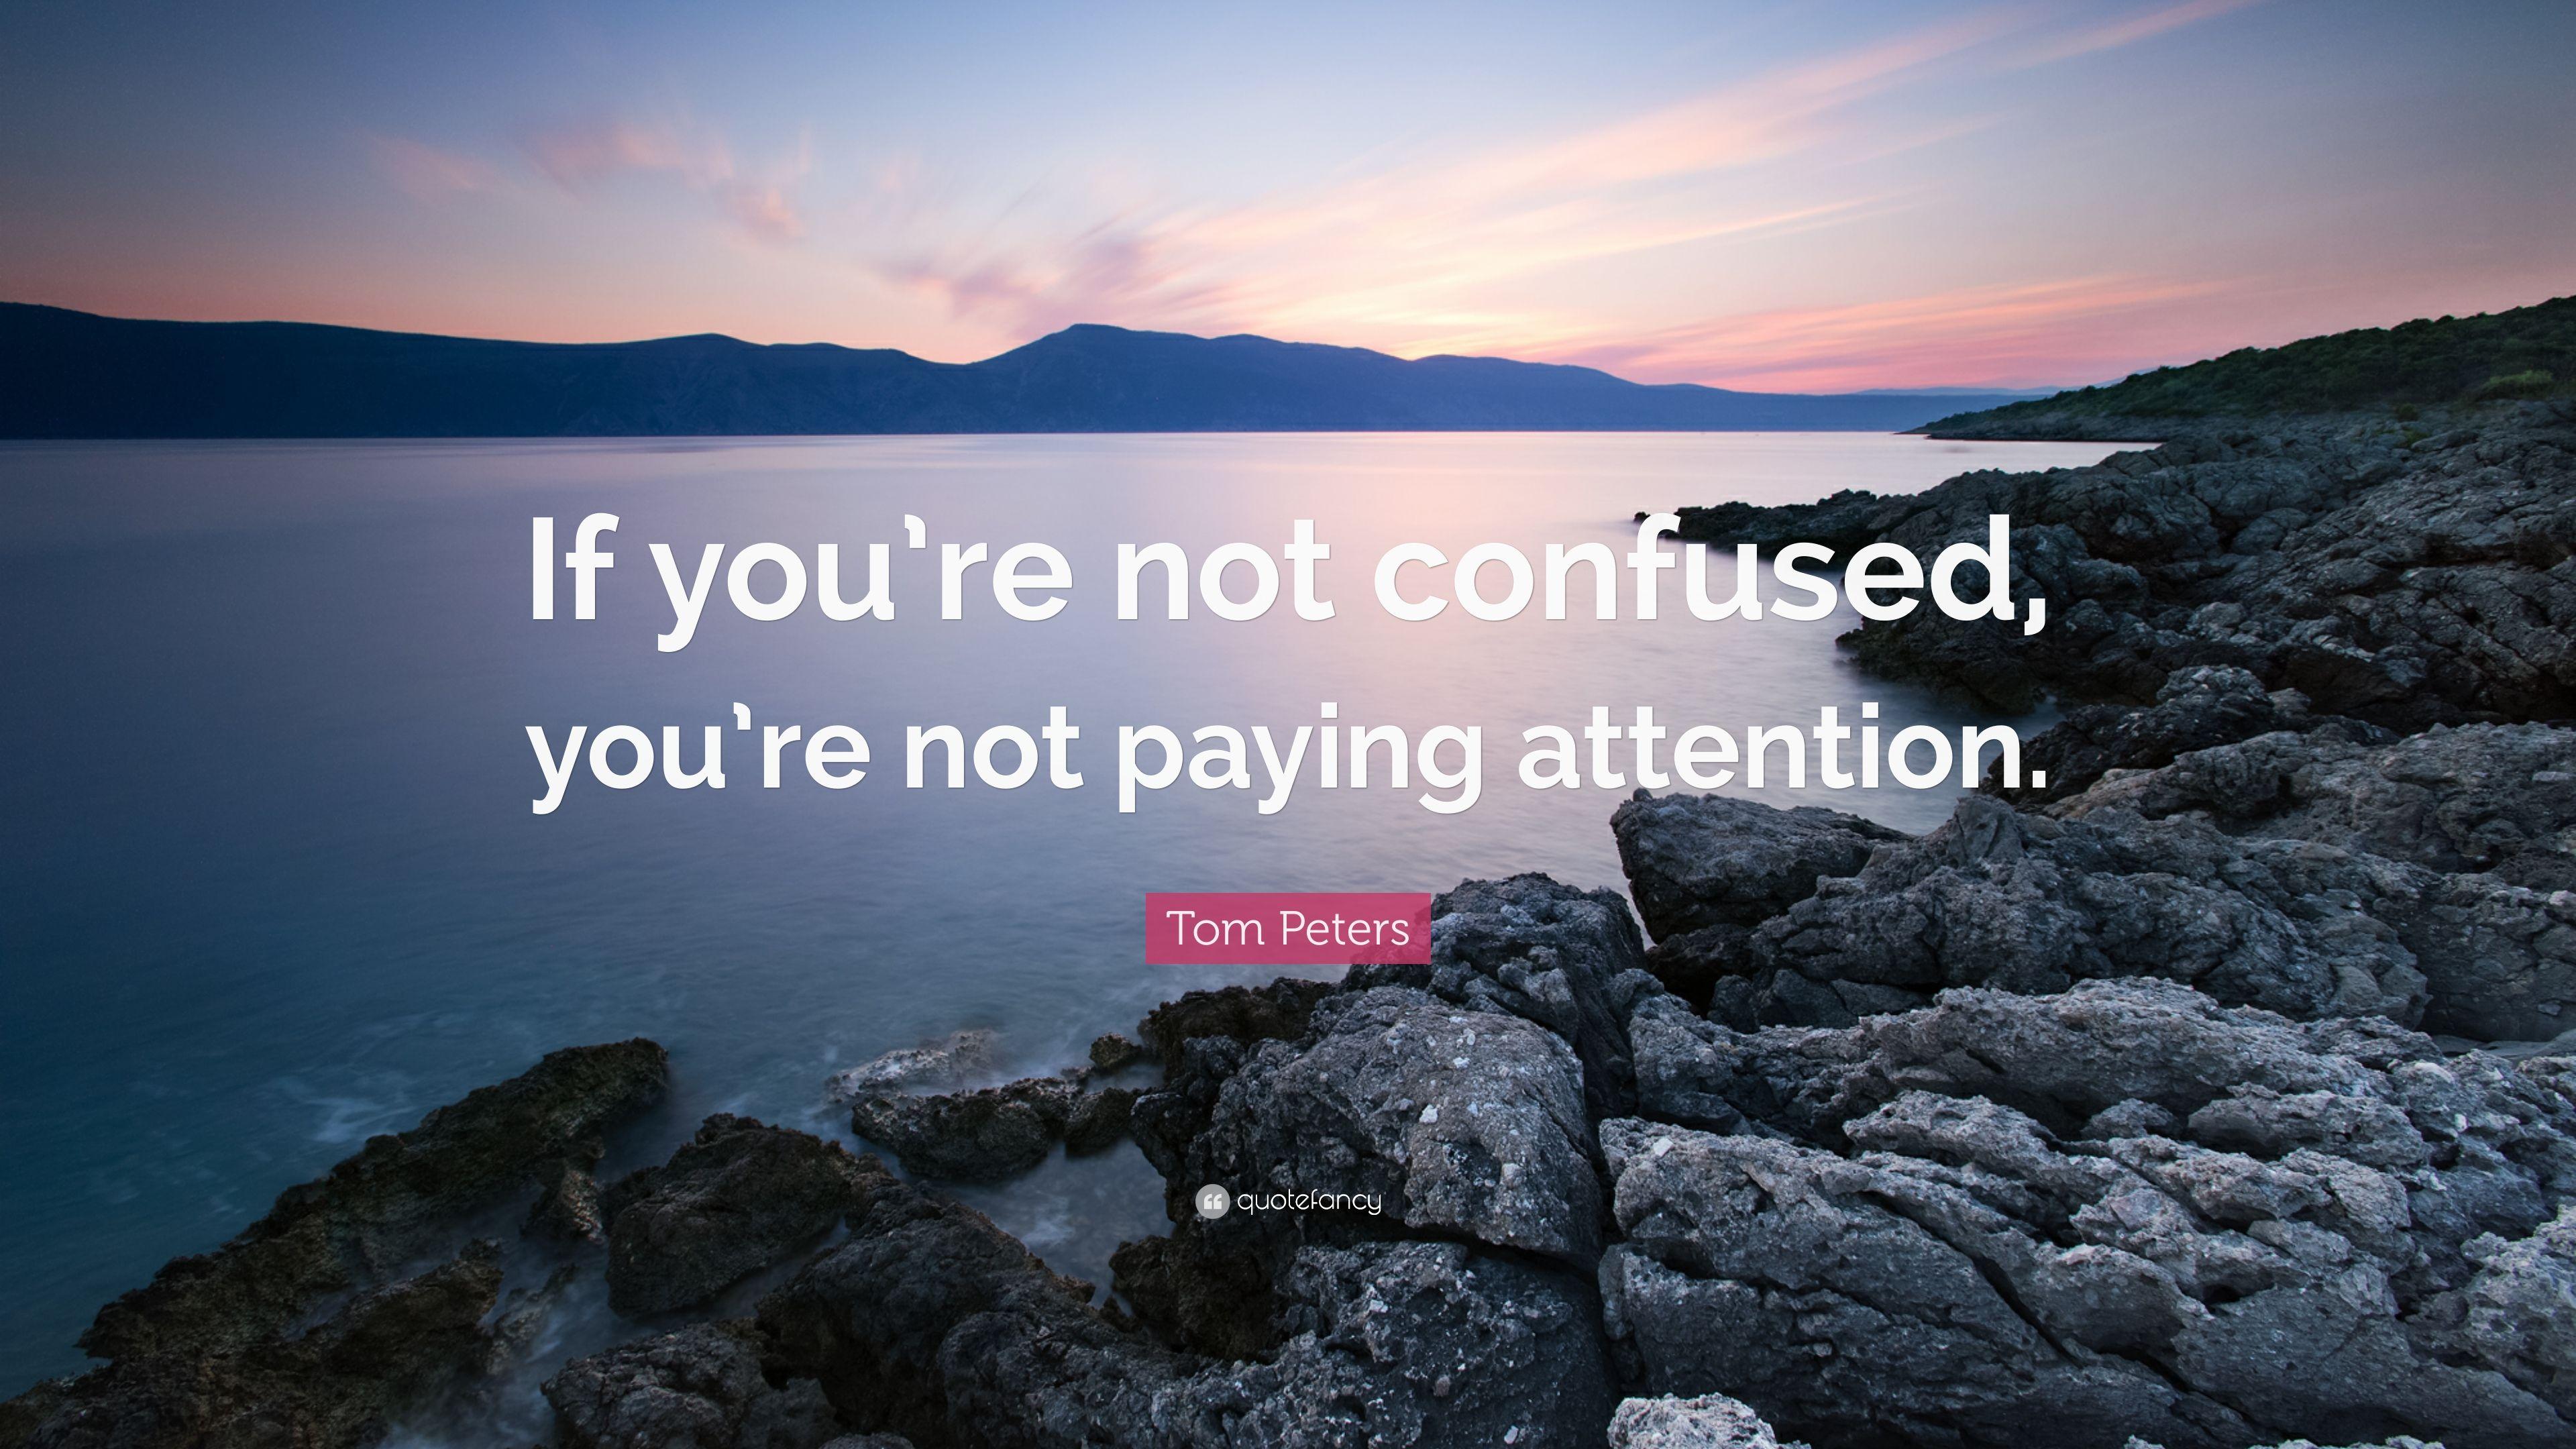 Tom Peters Quote: “If you're not confused, you're not paying